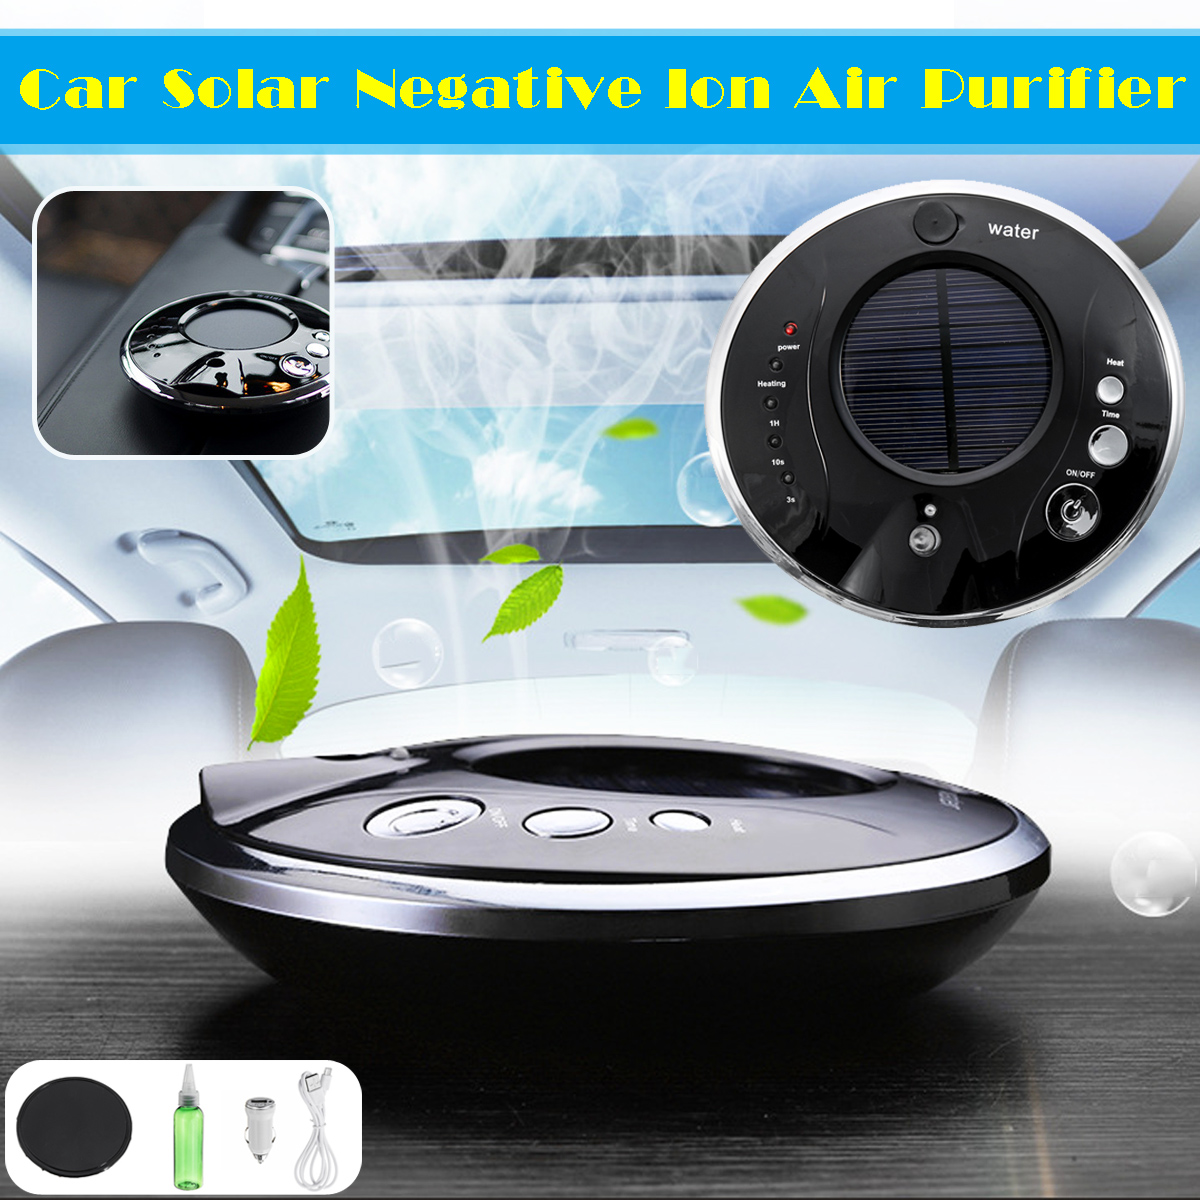 Car-Solar-Powered-Negative-Ion-Air-Purifier-5V-Cleaner-Purifier-humidification-1670794-1